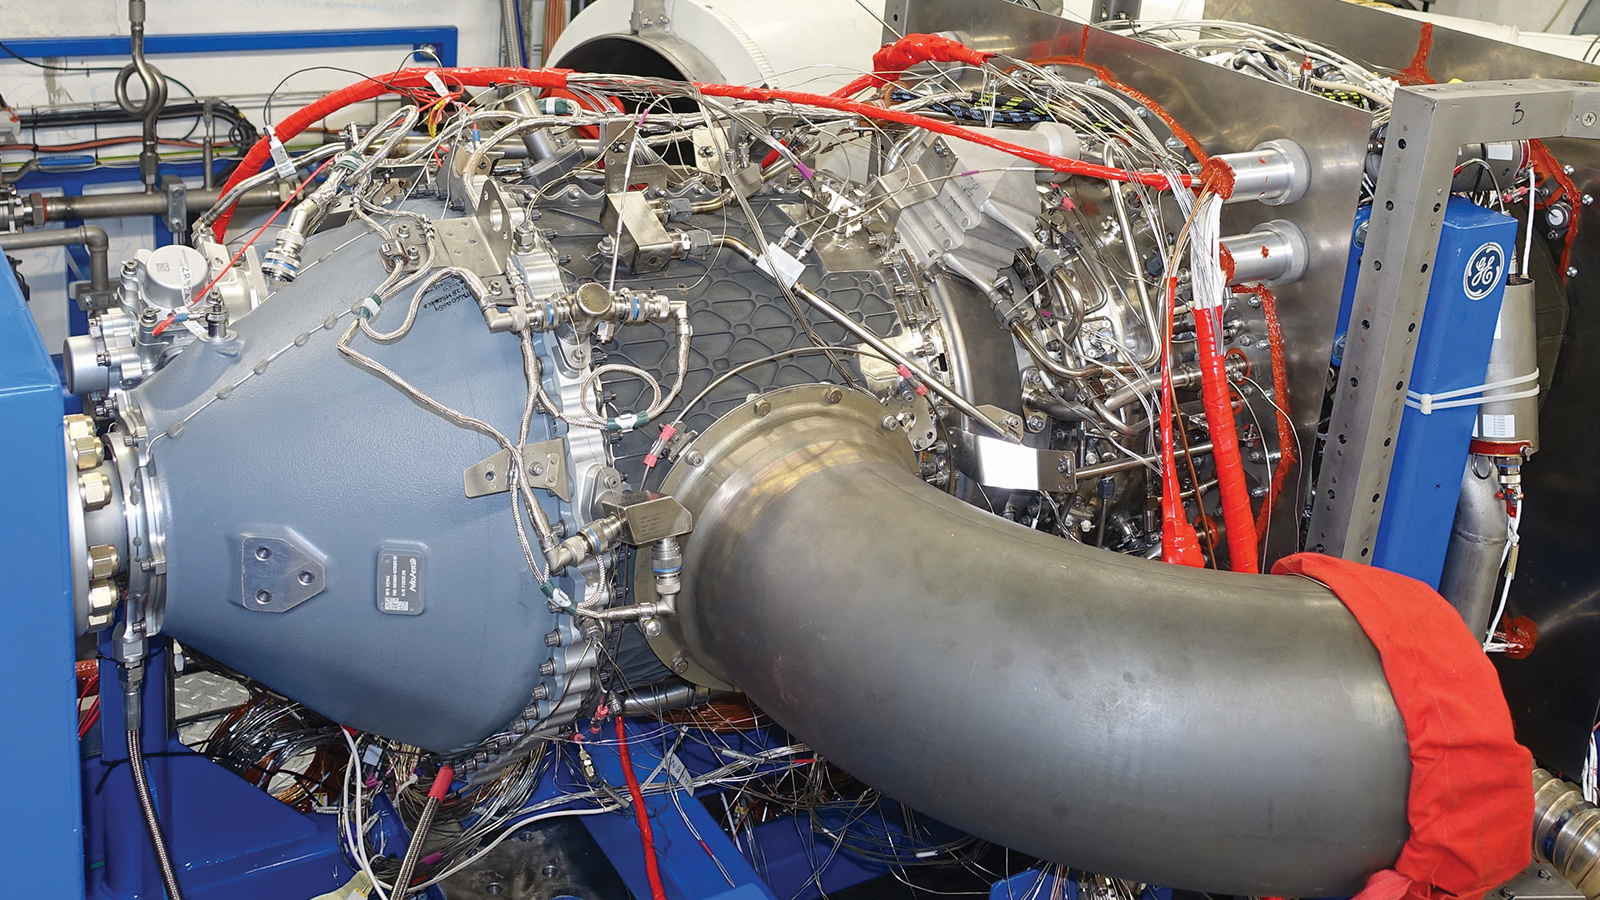 14 New Aircraft engine test cell design for New Ideas